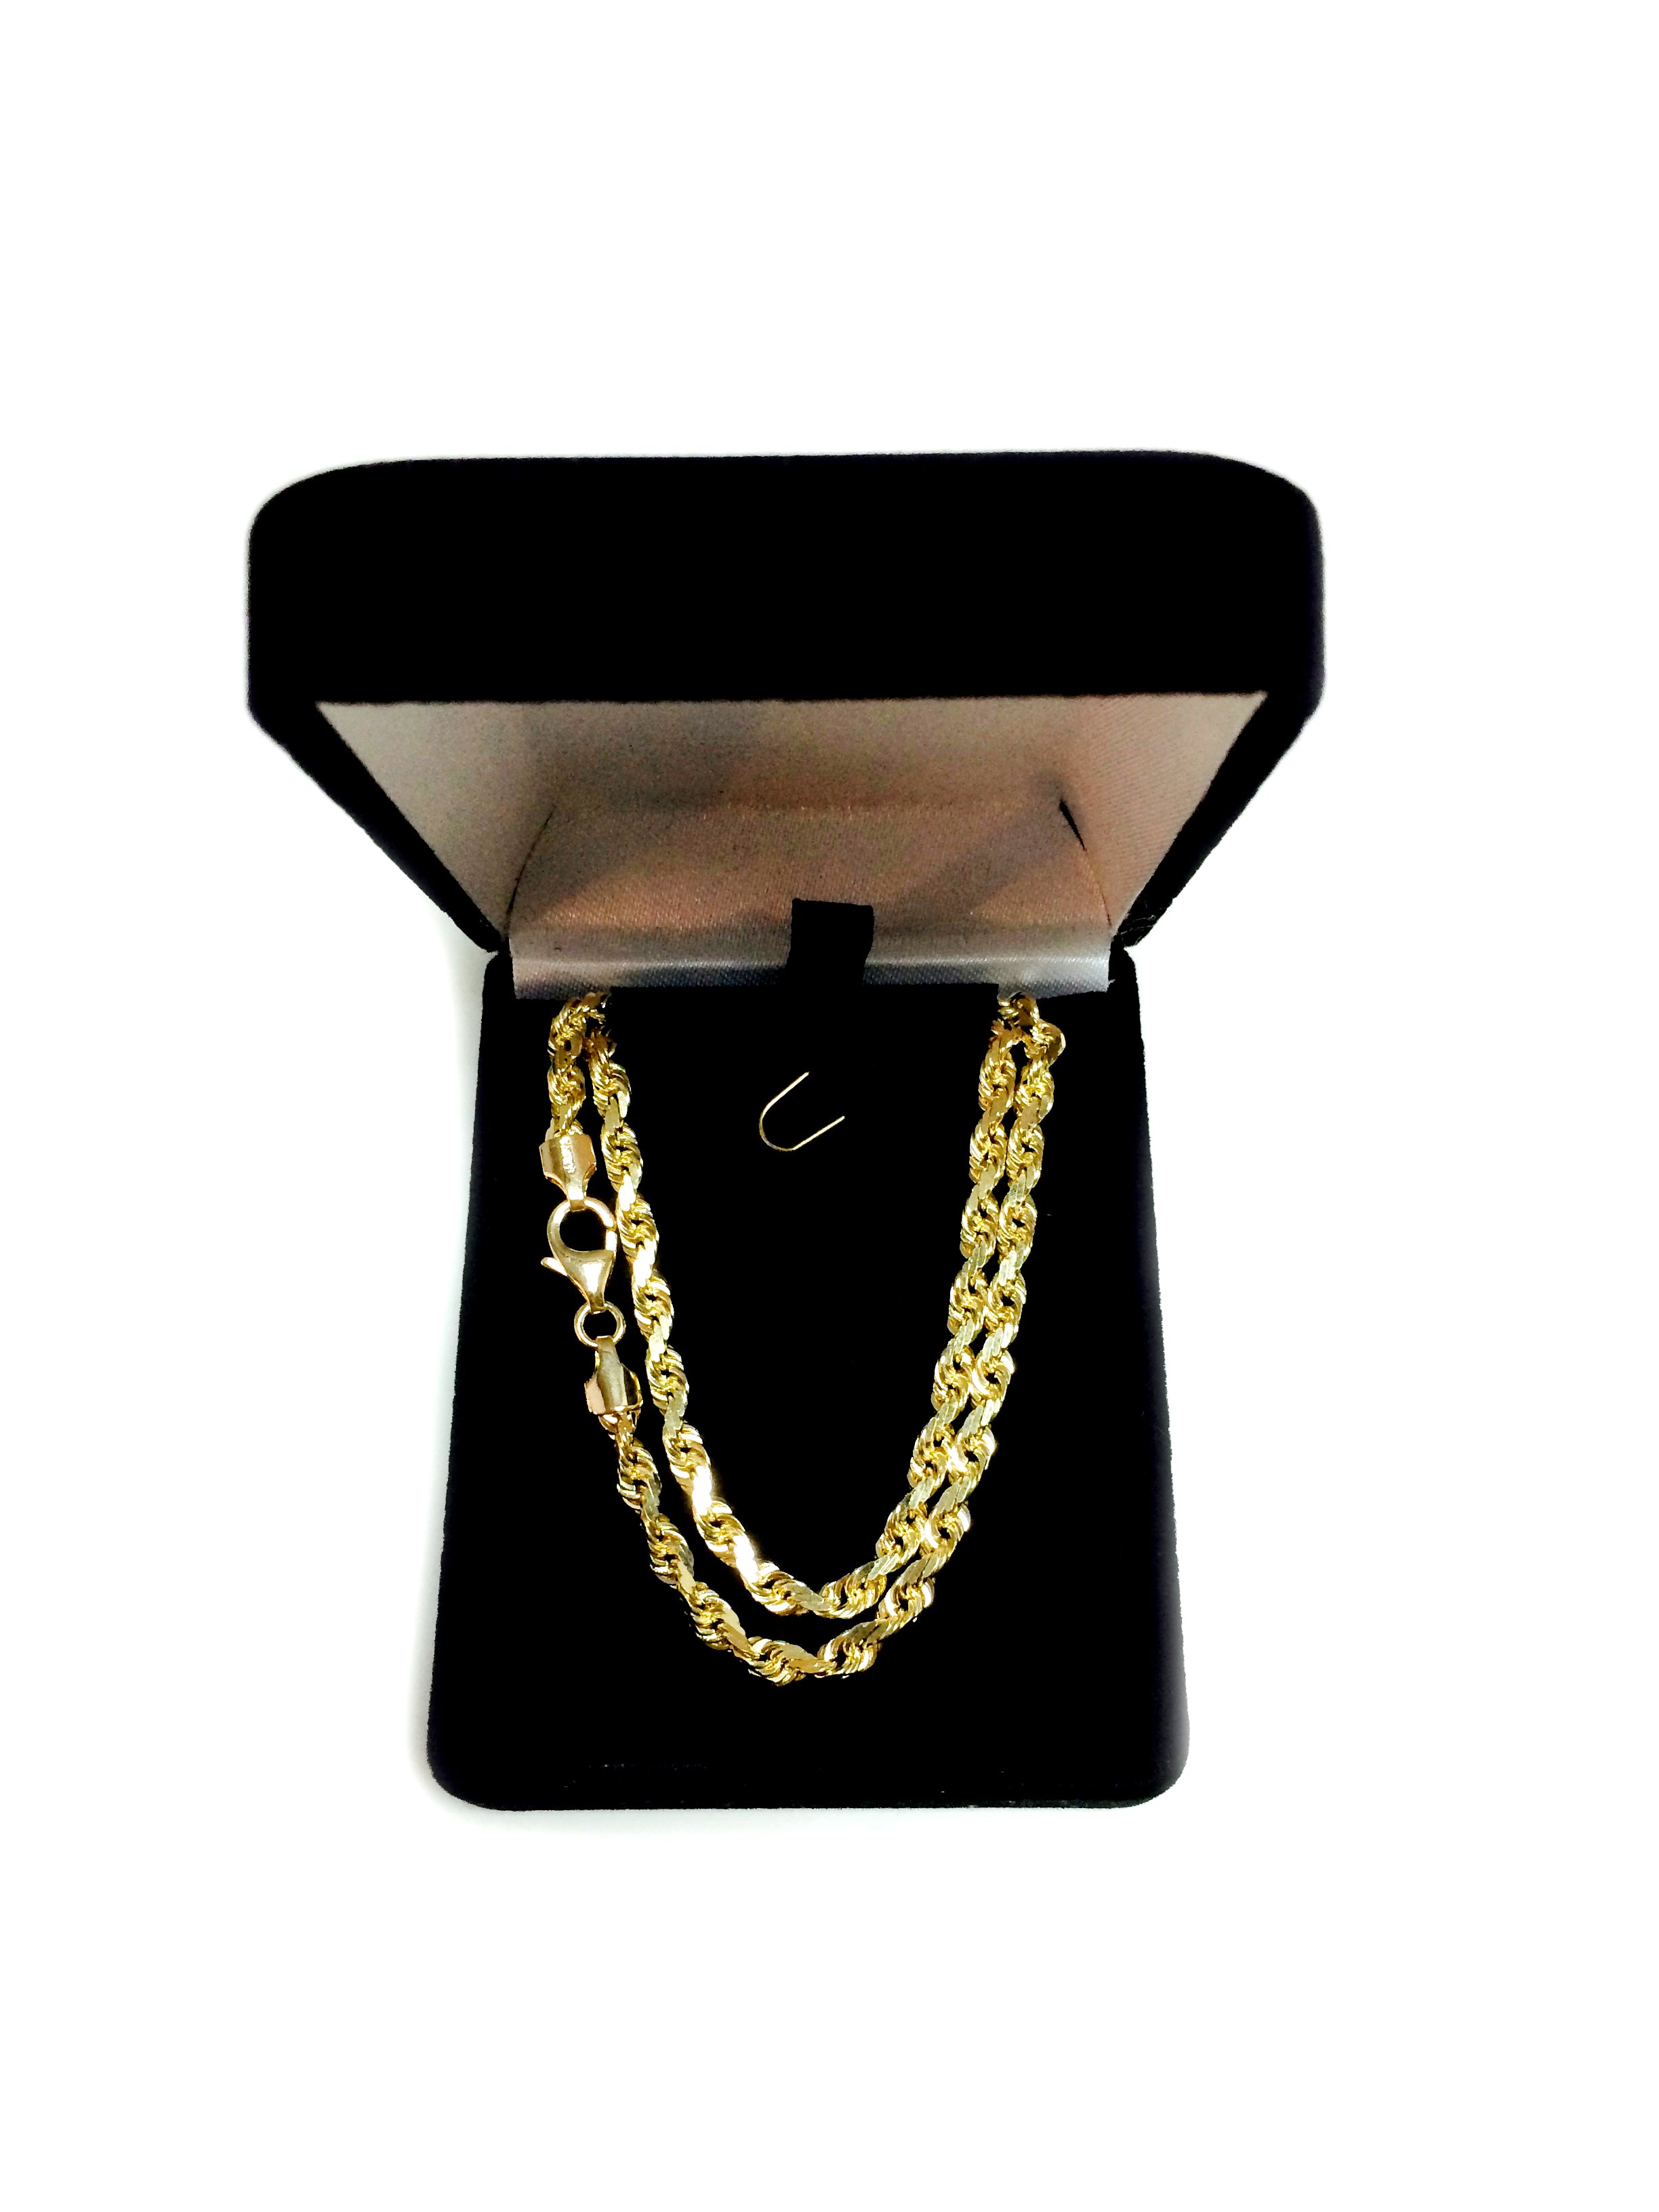 14k Yellow Solid Gold Diamond Cut Rope Chain Necklace, 4.0mm fine designer jewelry for men and women